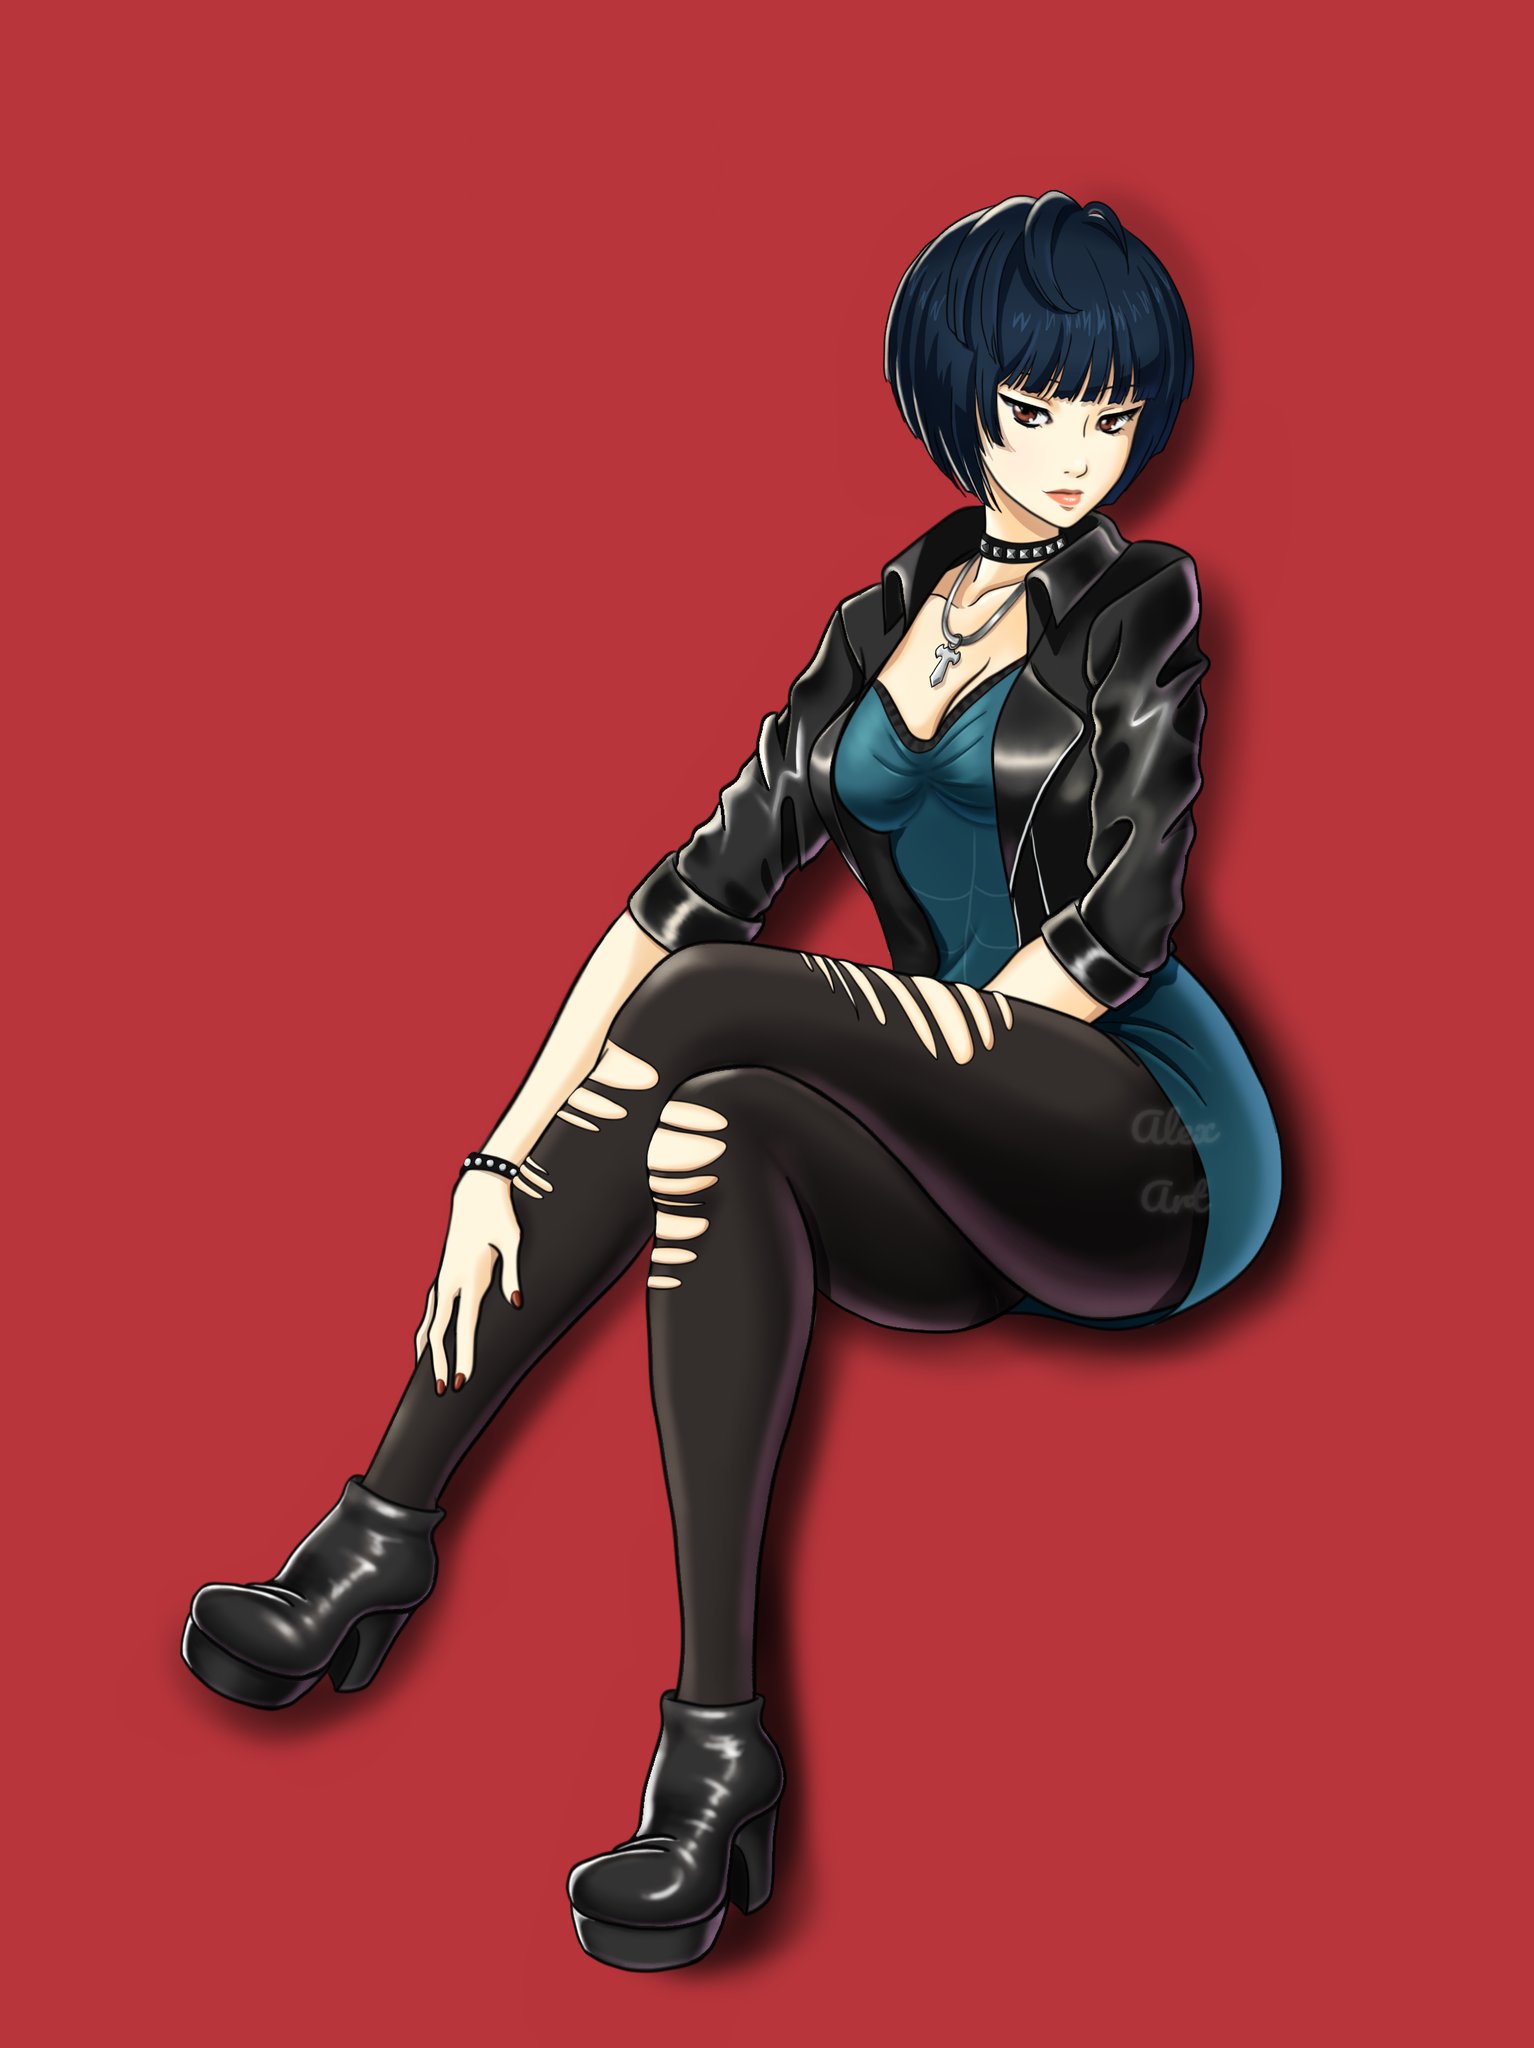 Rose Tae Takemi From Persona 5 Commission For My Good Friend Kevin Prints Are Up For Sale Art Animeart Digitalartist Digitalart Digitalillustration Takemipersona5 Taetakemi Taetakemipersona5 Persona5royalfanart Persona5